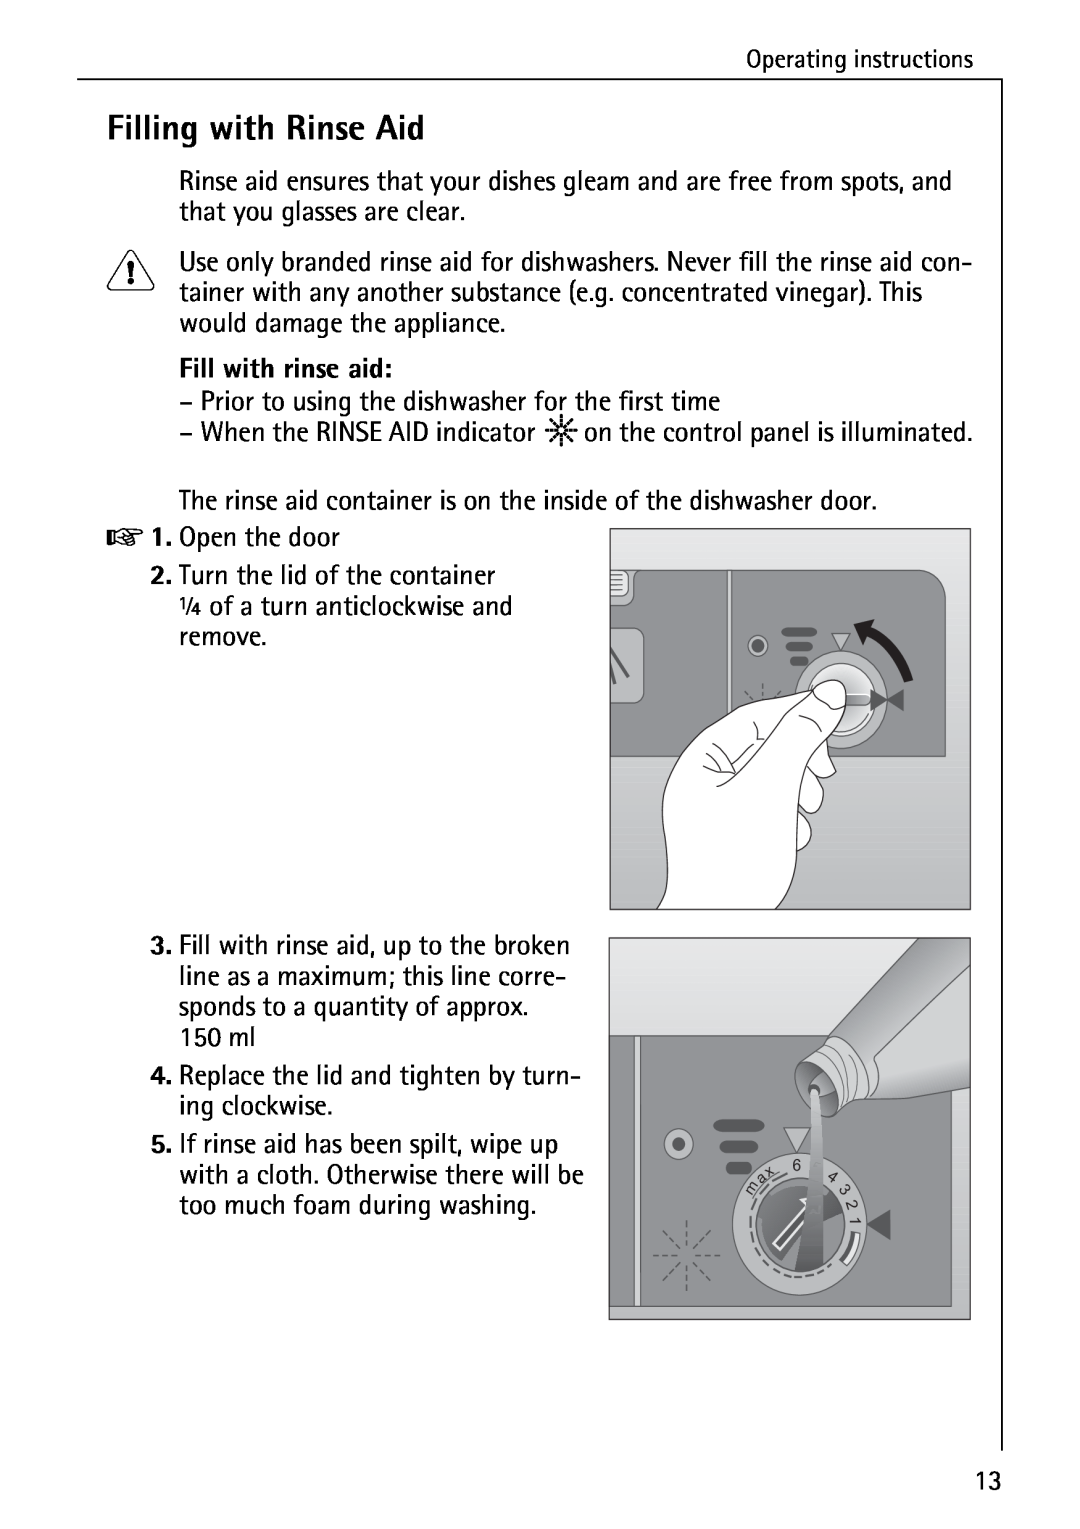 AEG 6281 I manual Filling with Rinse Aid, Fill with rinse aid 